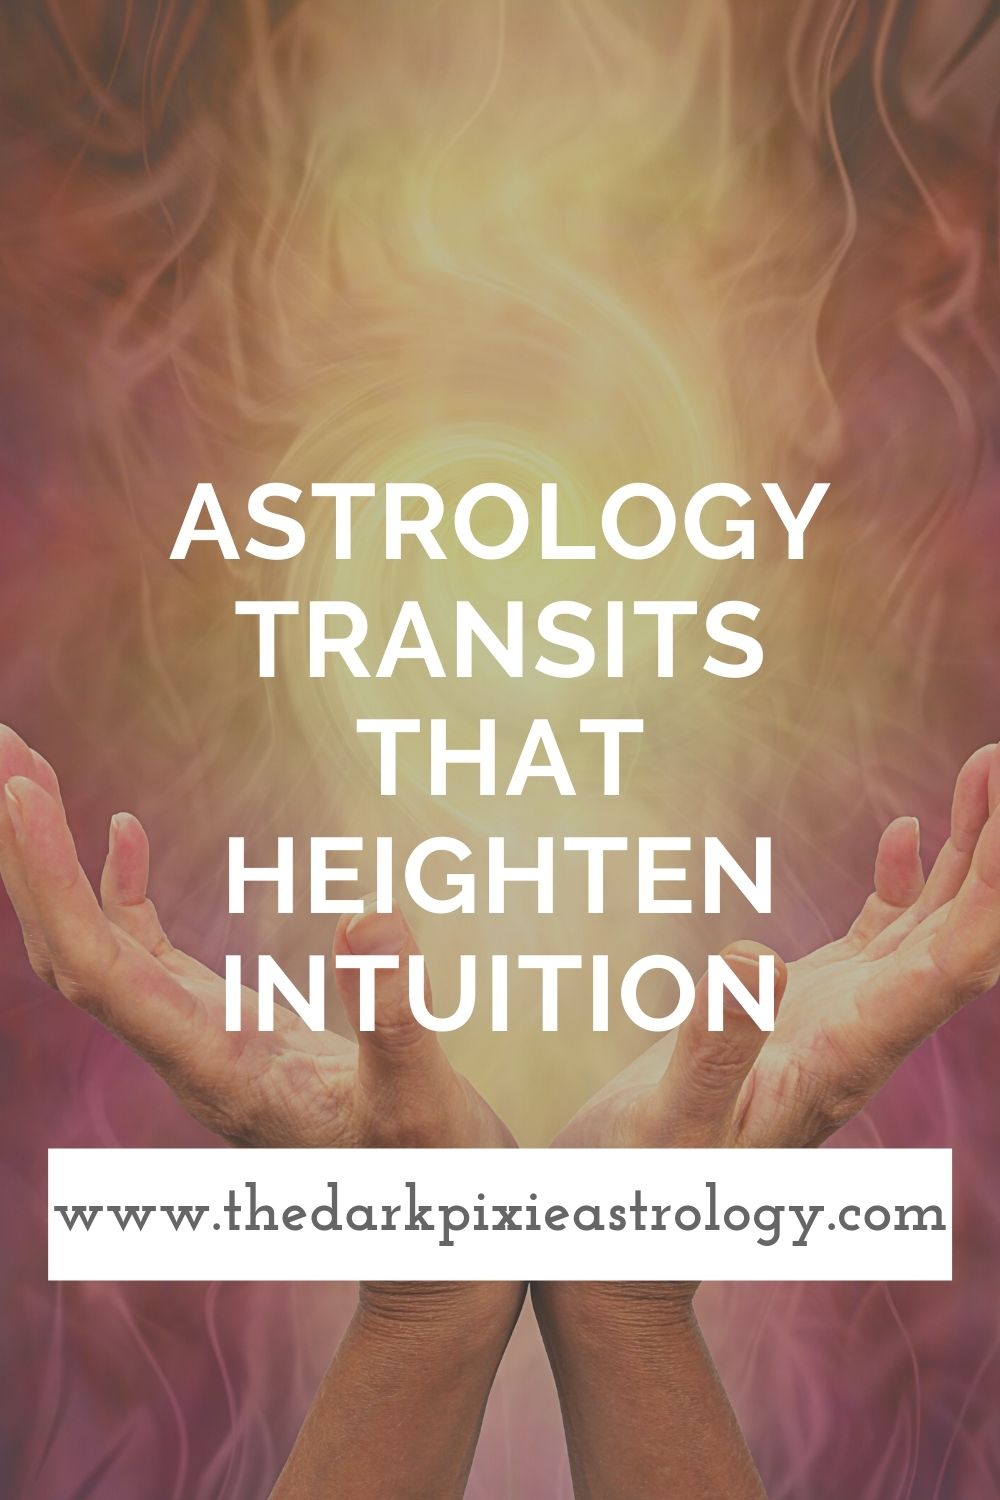 Astrology Transits That Heighten Intuition - The Dark Pixie Astrology